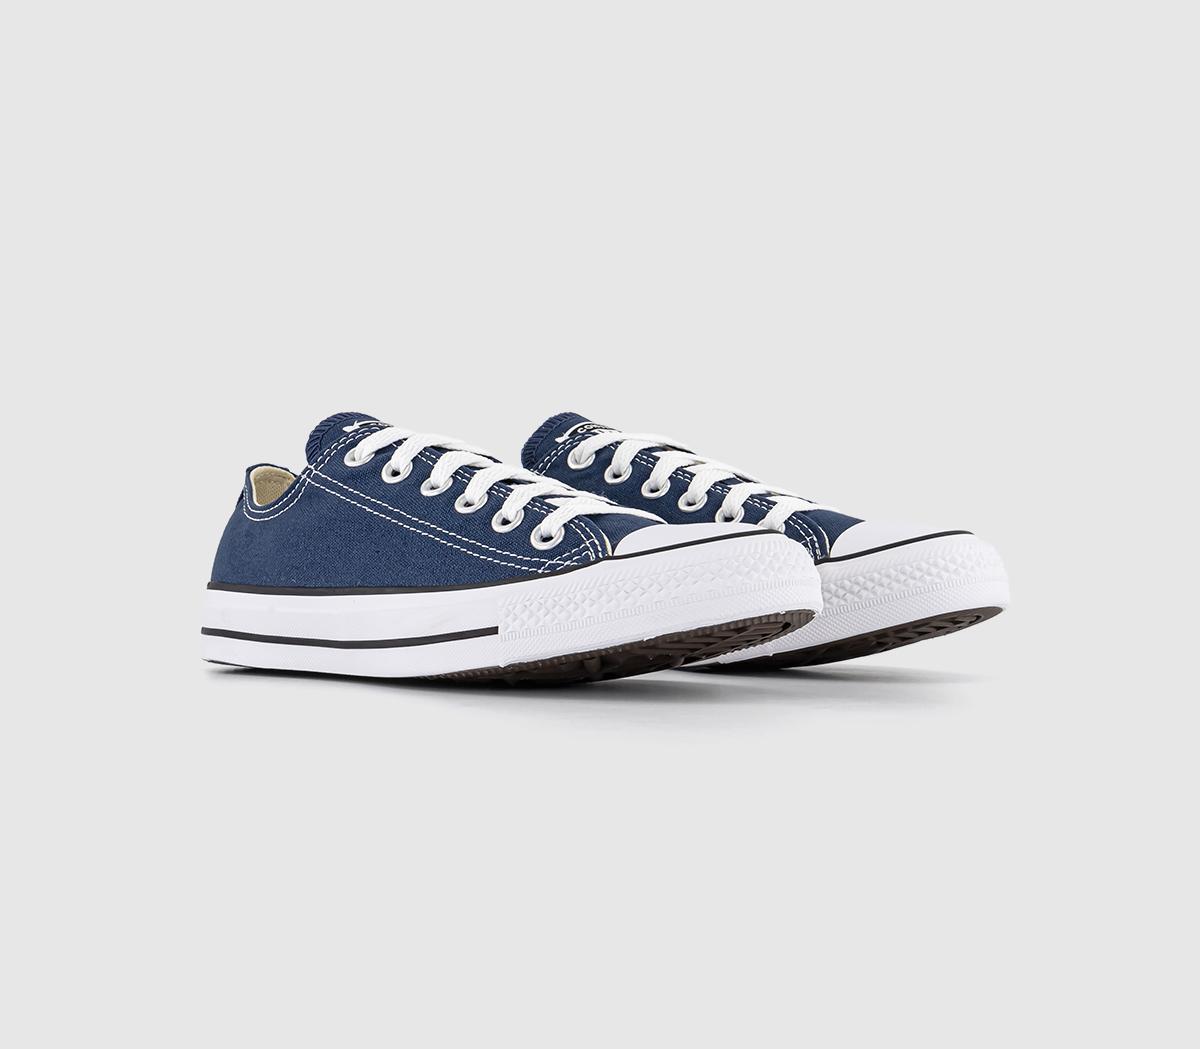 Mens Converse All Star Low Canvas Trainers In Navy Blue And White, 6